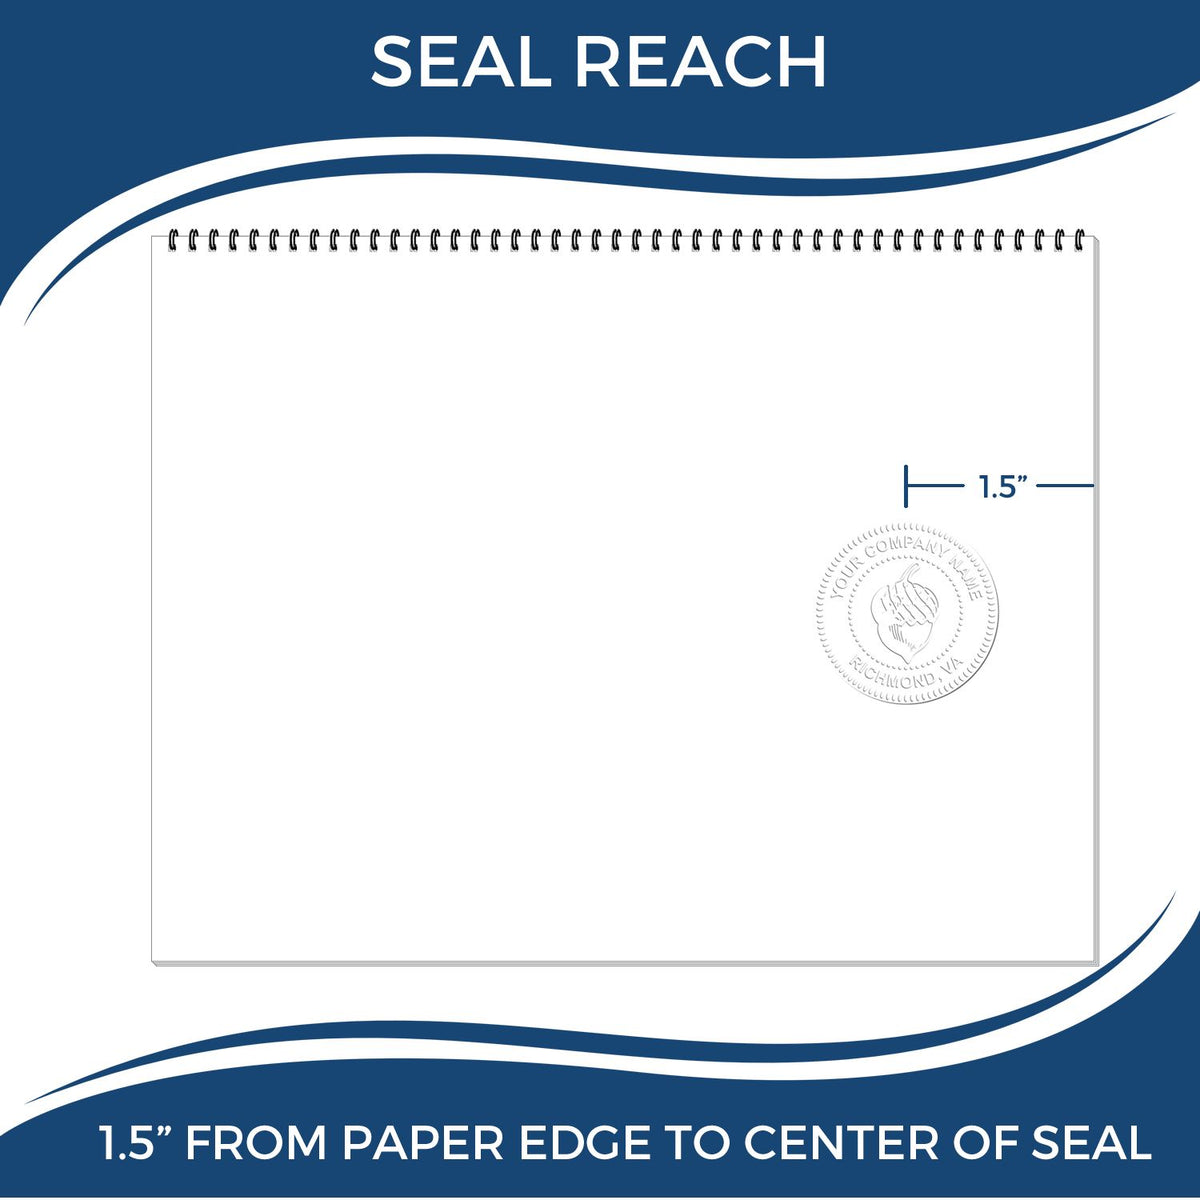 An infographic showing the seal reach which is represented by a ruler and a miniature seal image of the Handheld Oregon Professional Geologist Embosser